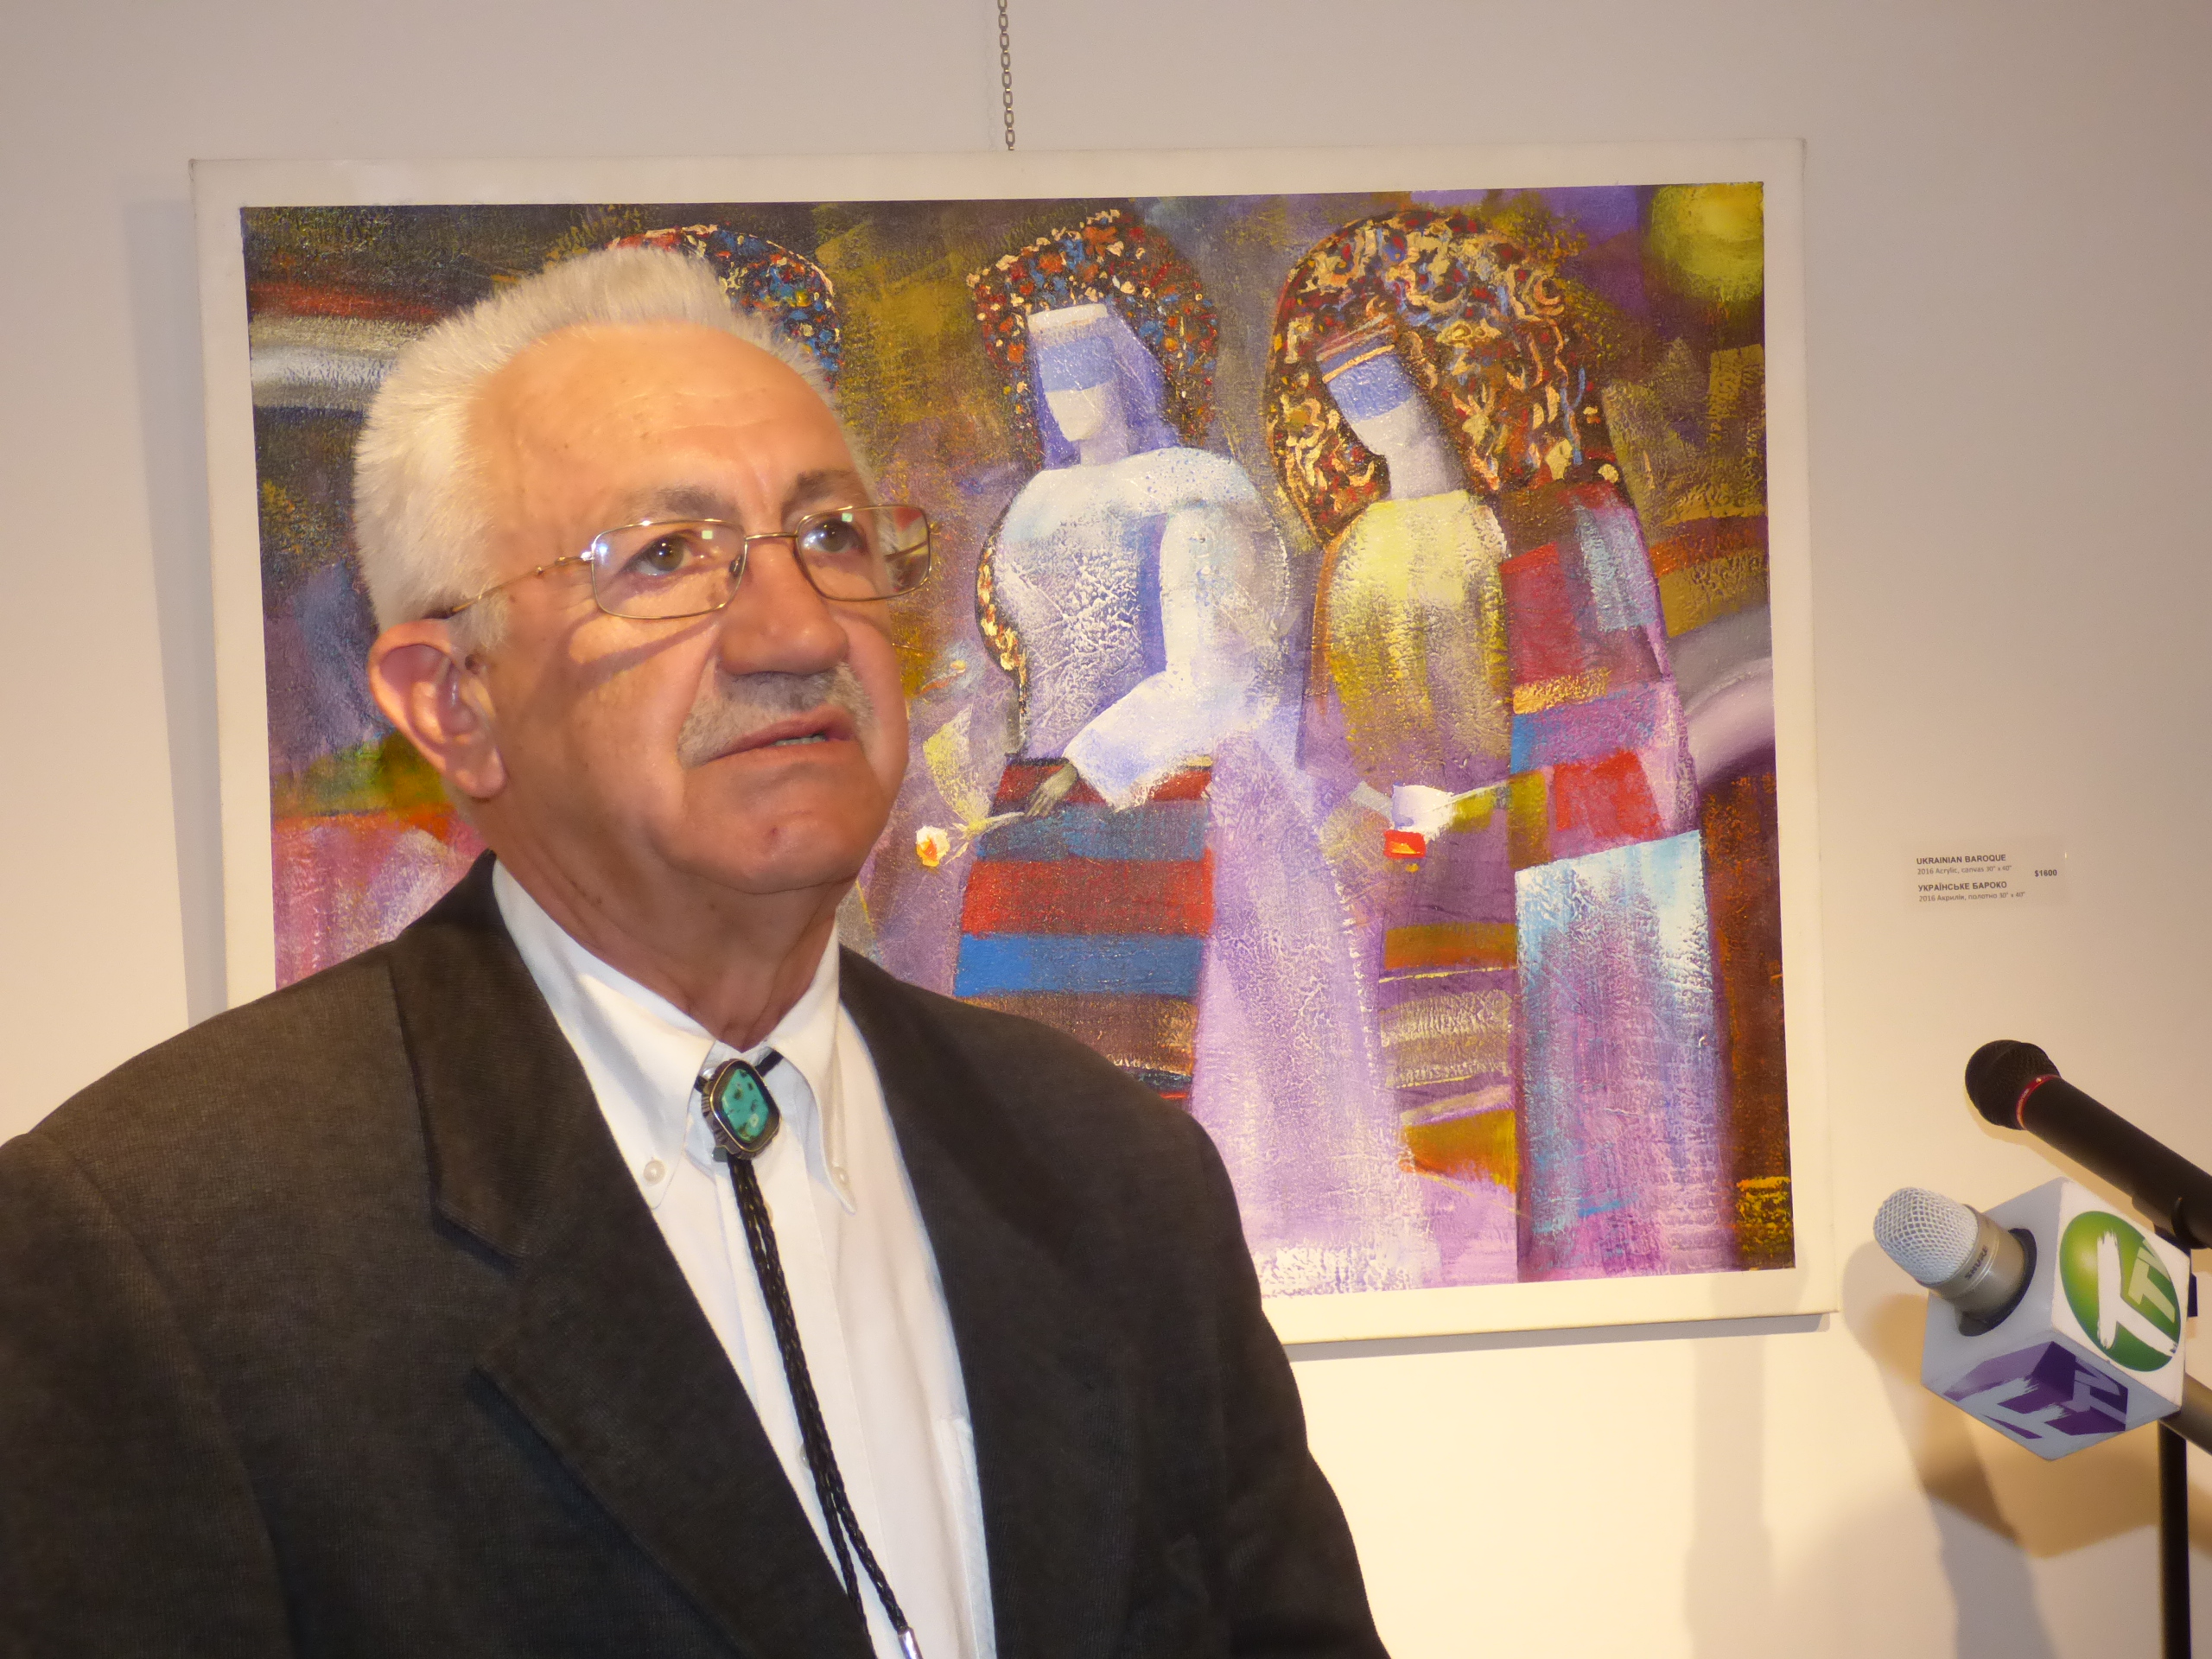 Legends of Time: Exhibition of Paintings by Oleh Nedoshytko, Reception, April 7, 2019